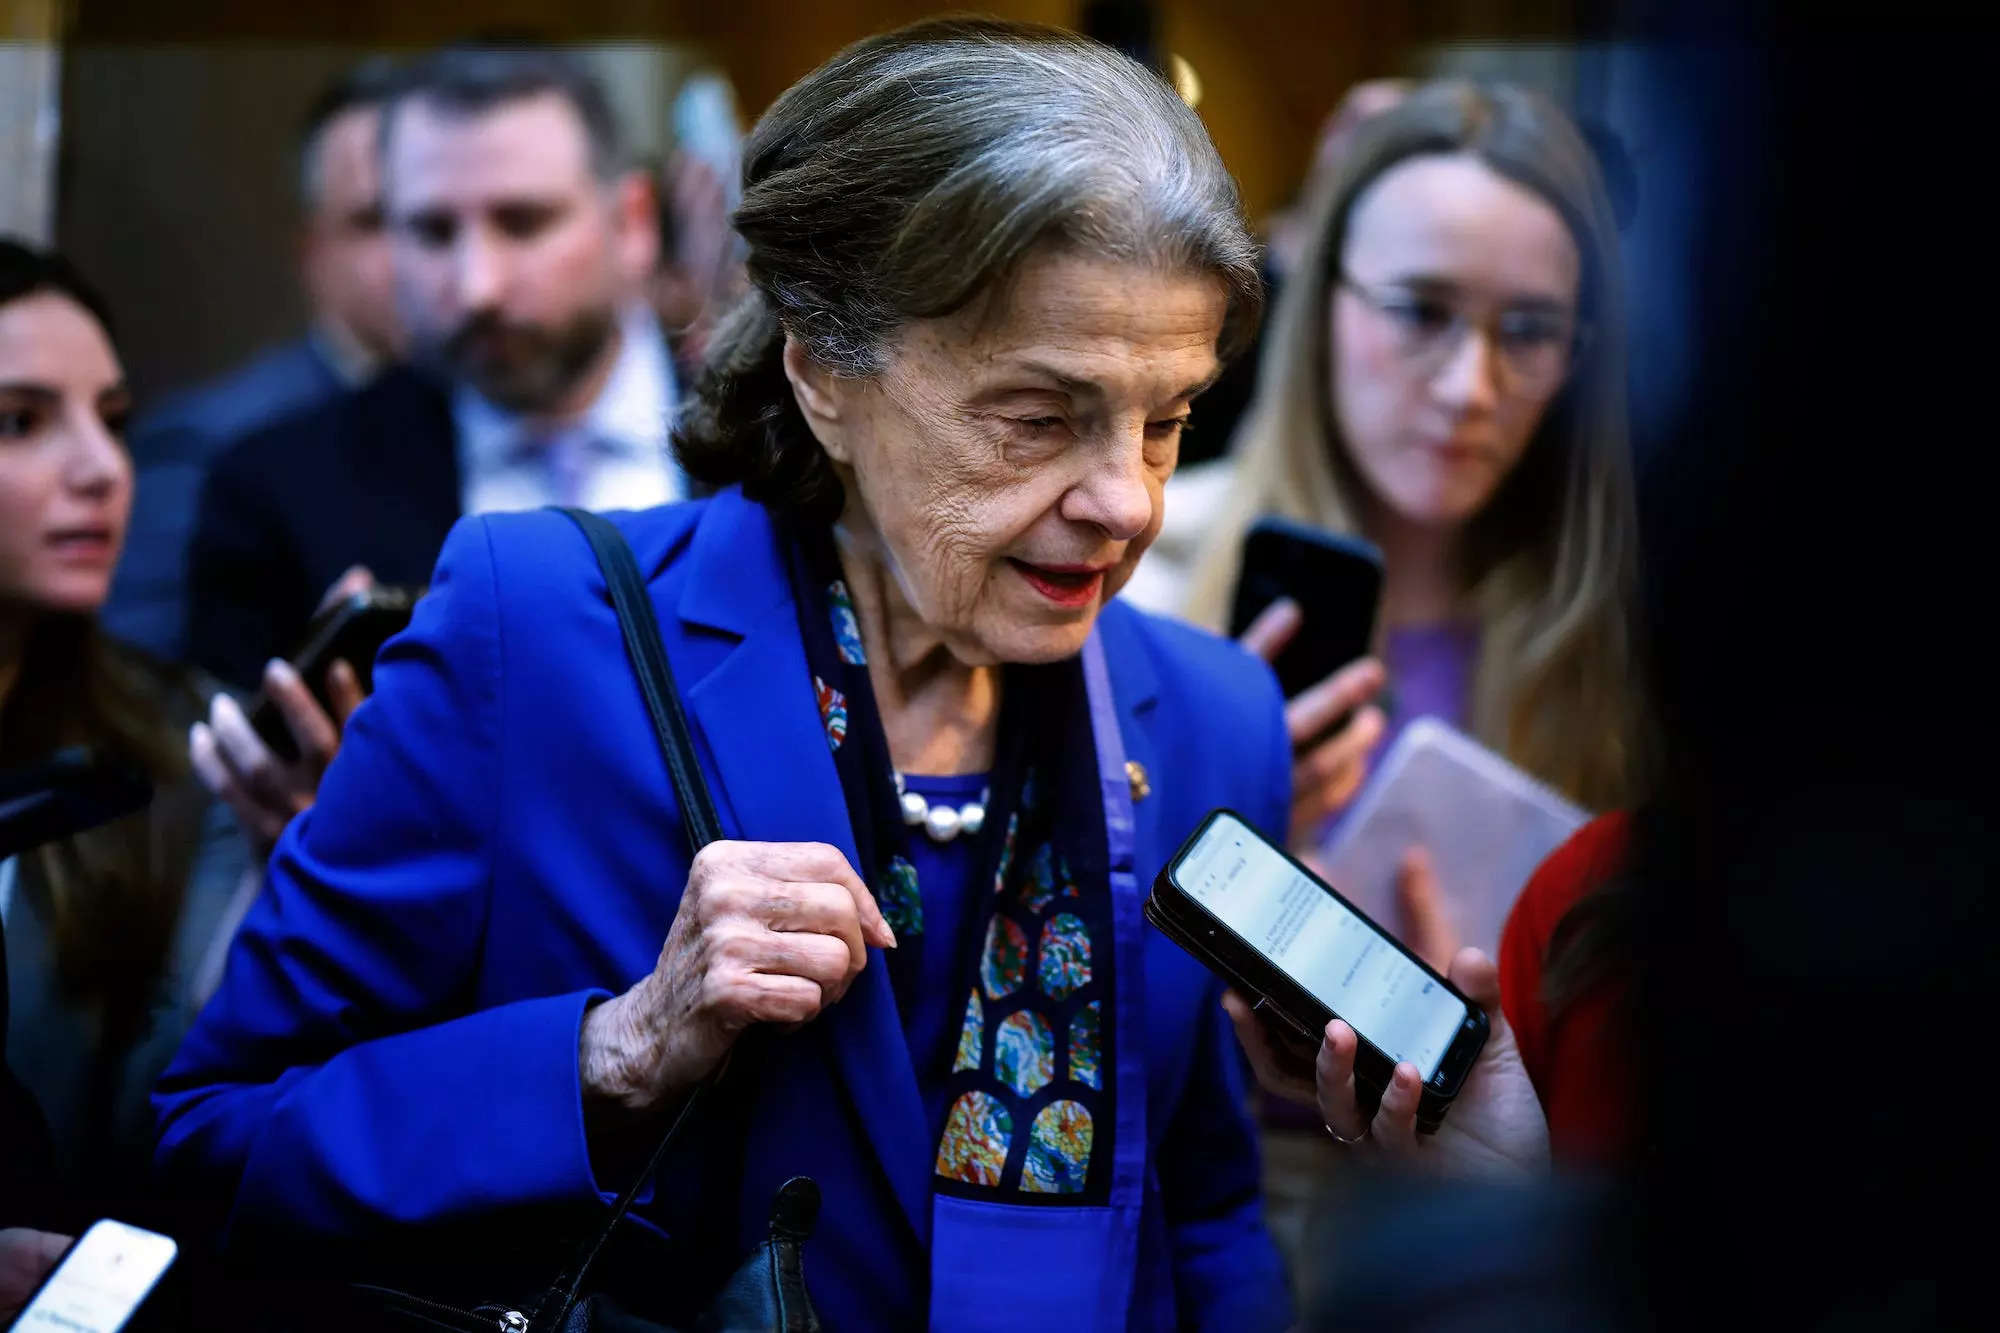 Baffled Dianne Feinstein walks out of Senate chamber wondering what just happened: ‘Did I vote for that?’